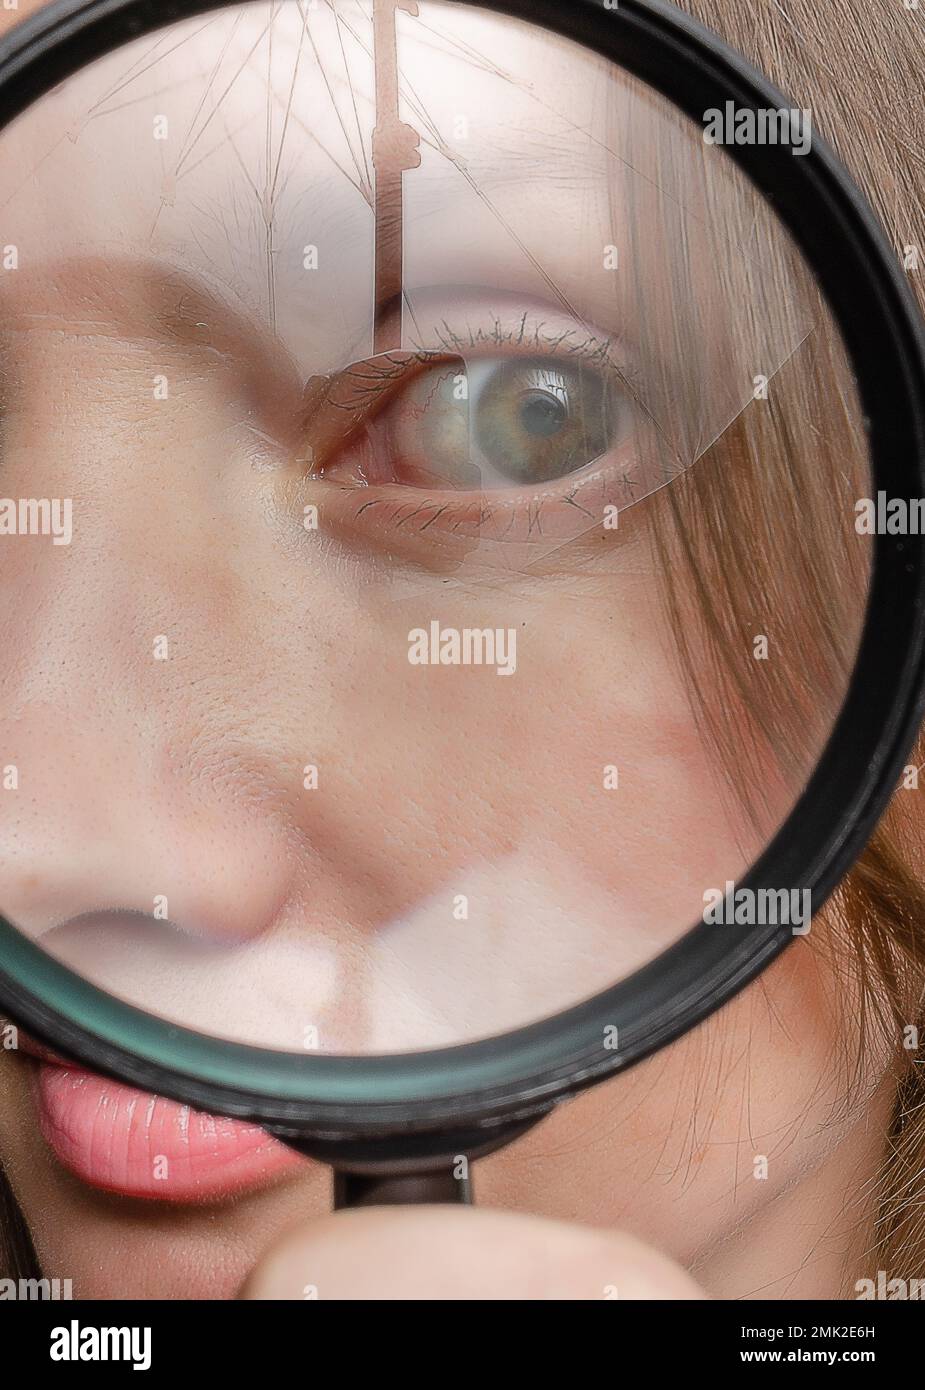 Adult woman's eye seen through magnifying glass. Reflections. Mystery Stock Photo